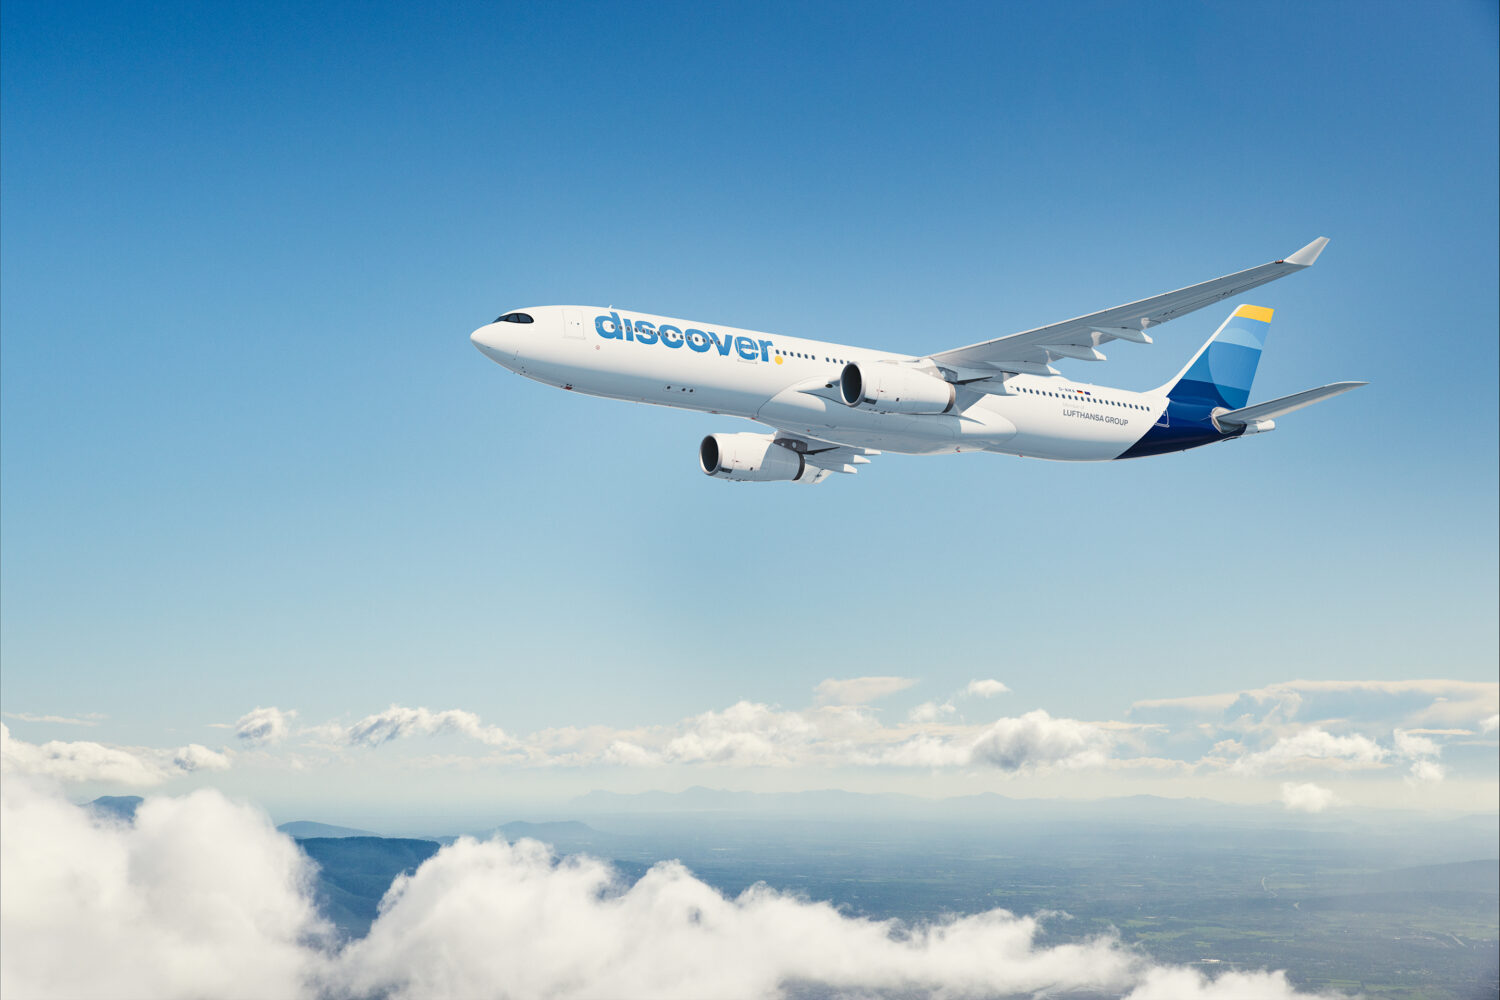 Discover Airlines A330-300, Quelle: Discover Airlines